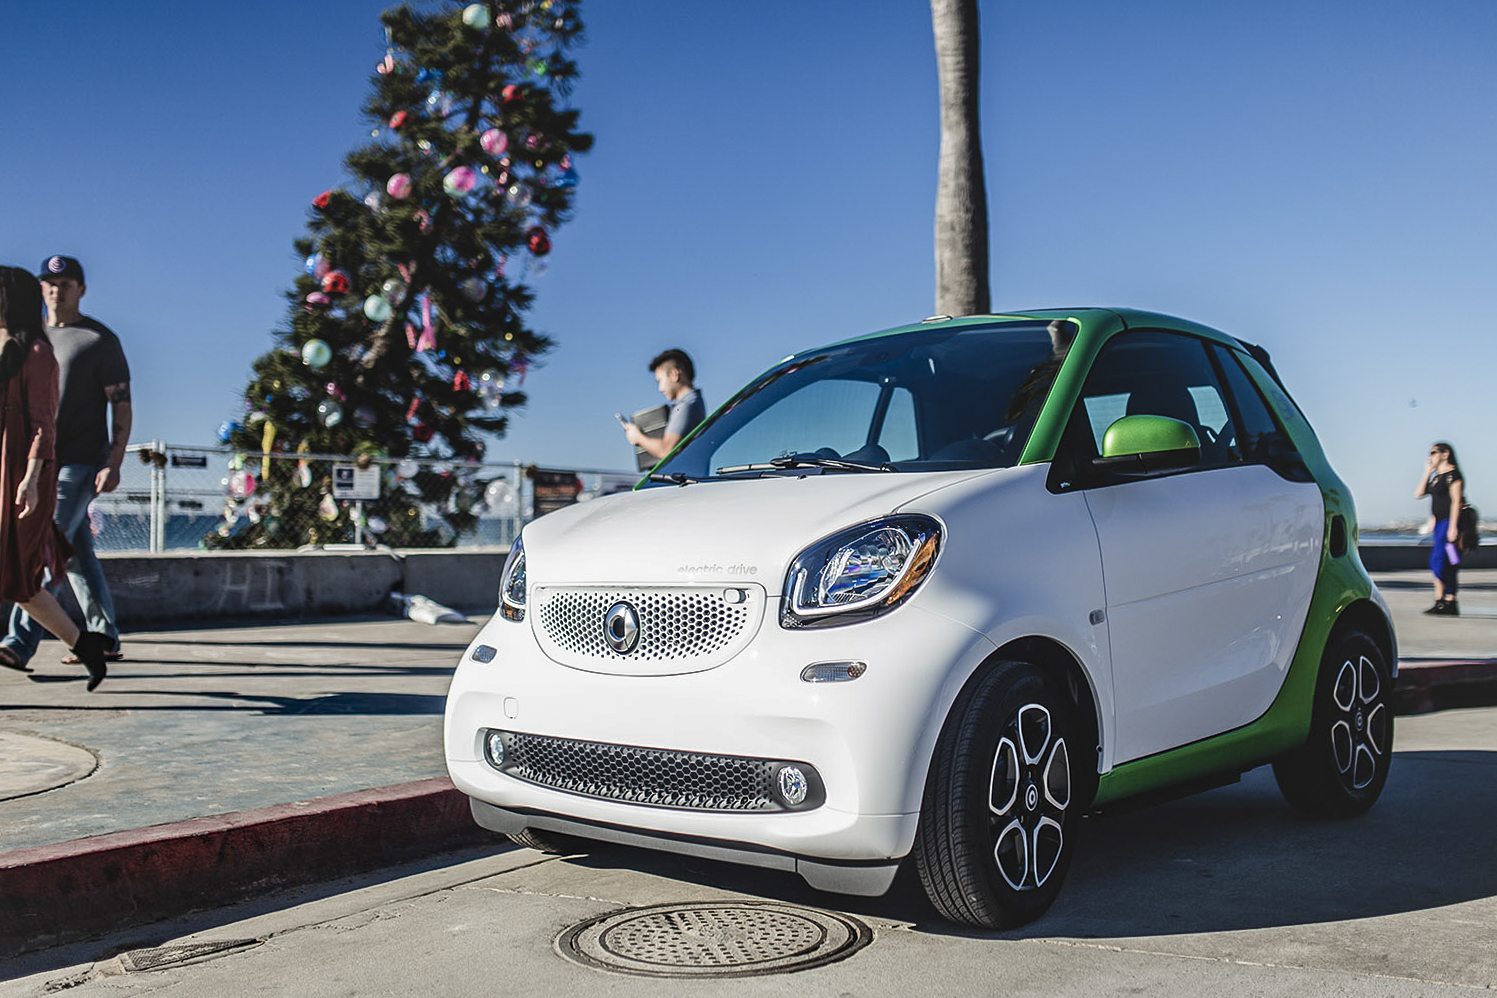 https://www.digitaltrends.com/wp-content/uploads/2018/01/2018-Smart-Fortwo-Cabrio-Electric-Drive-First-Drive-15120.jpg?p=1